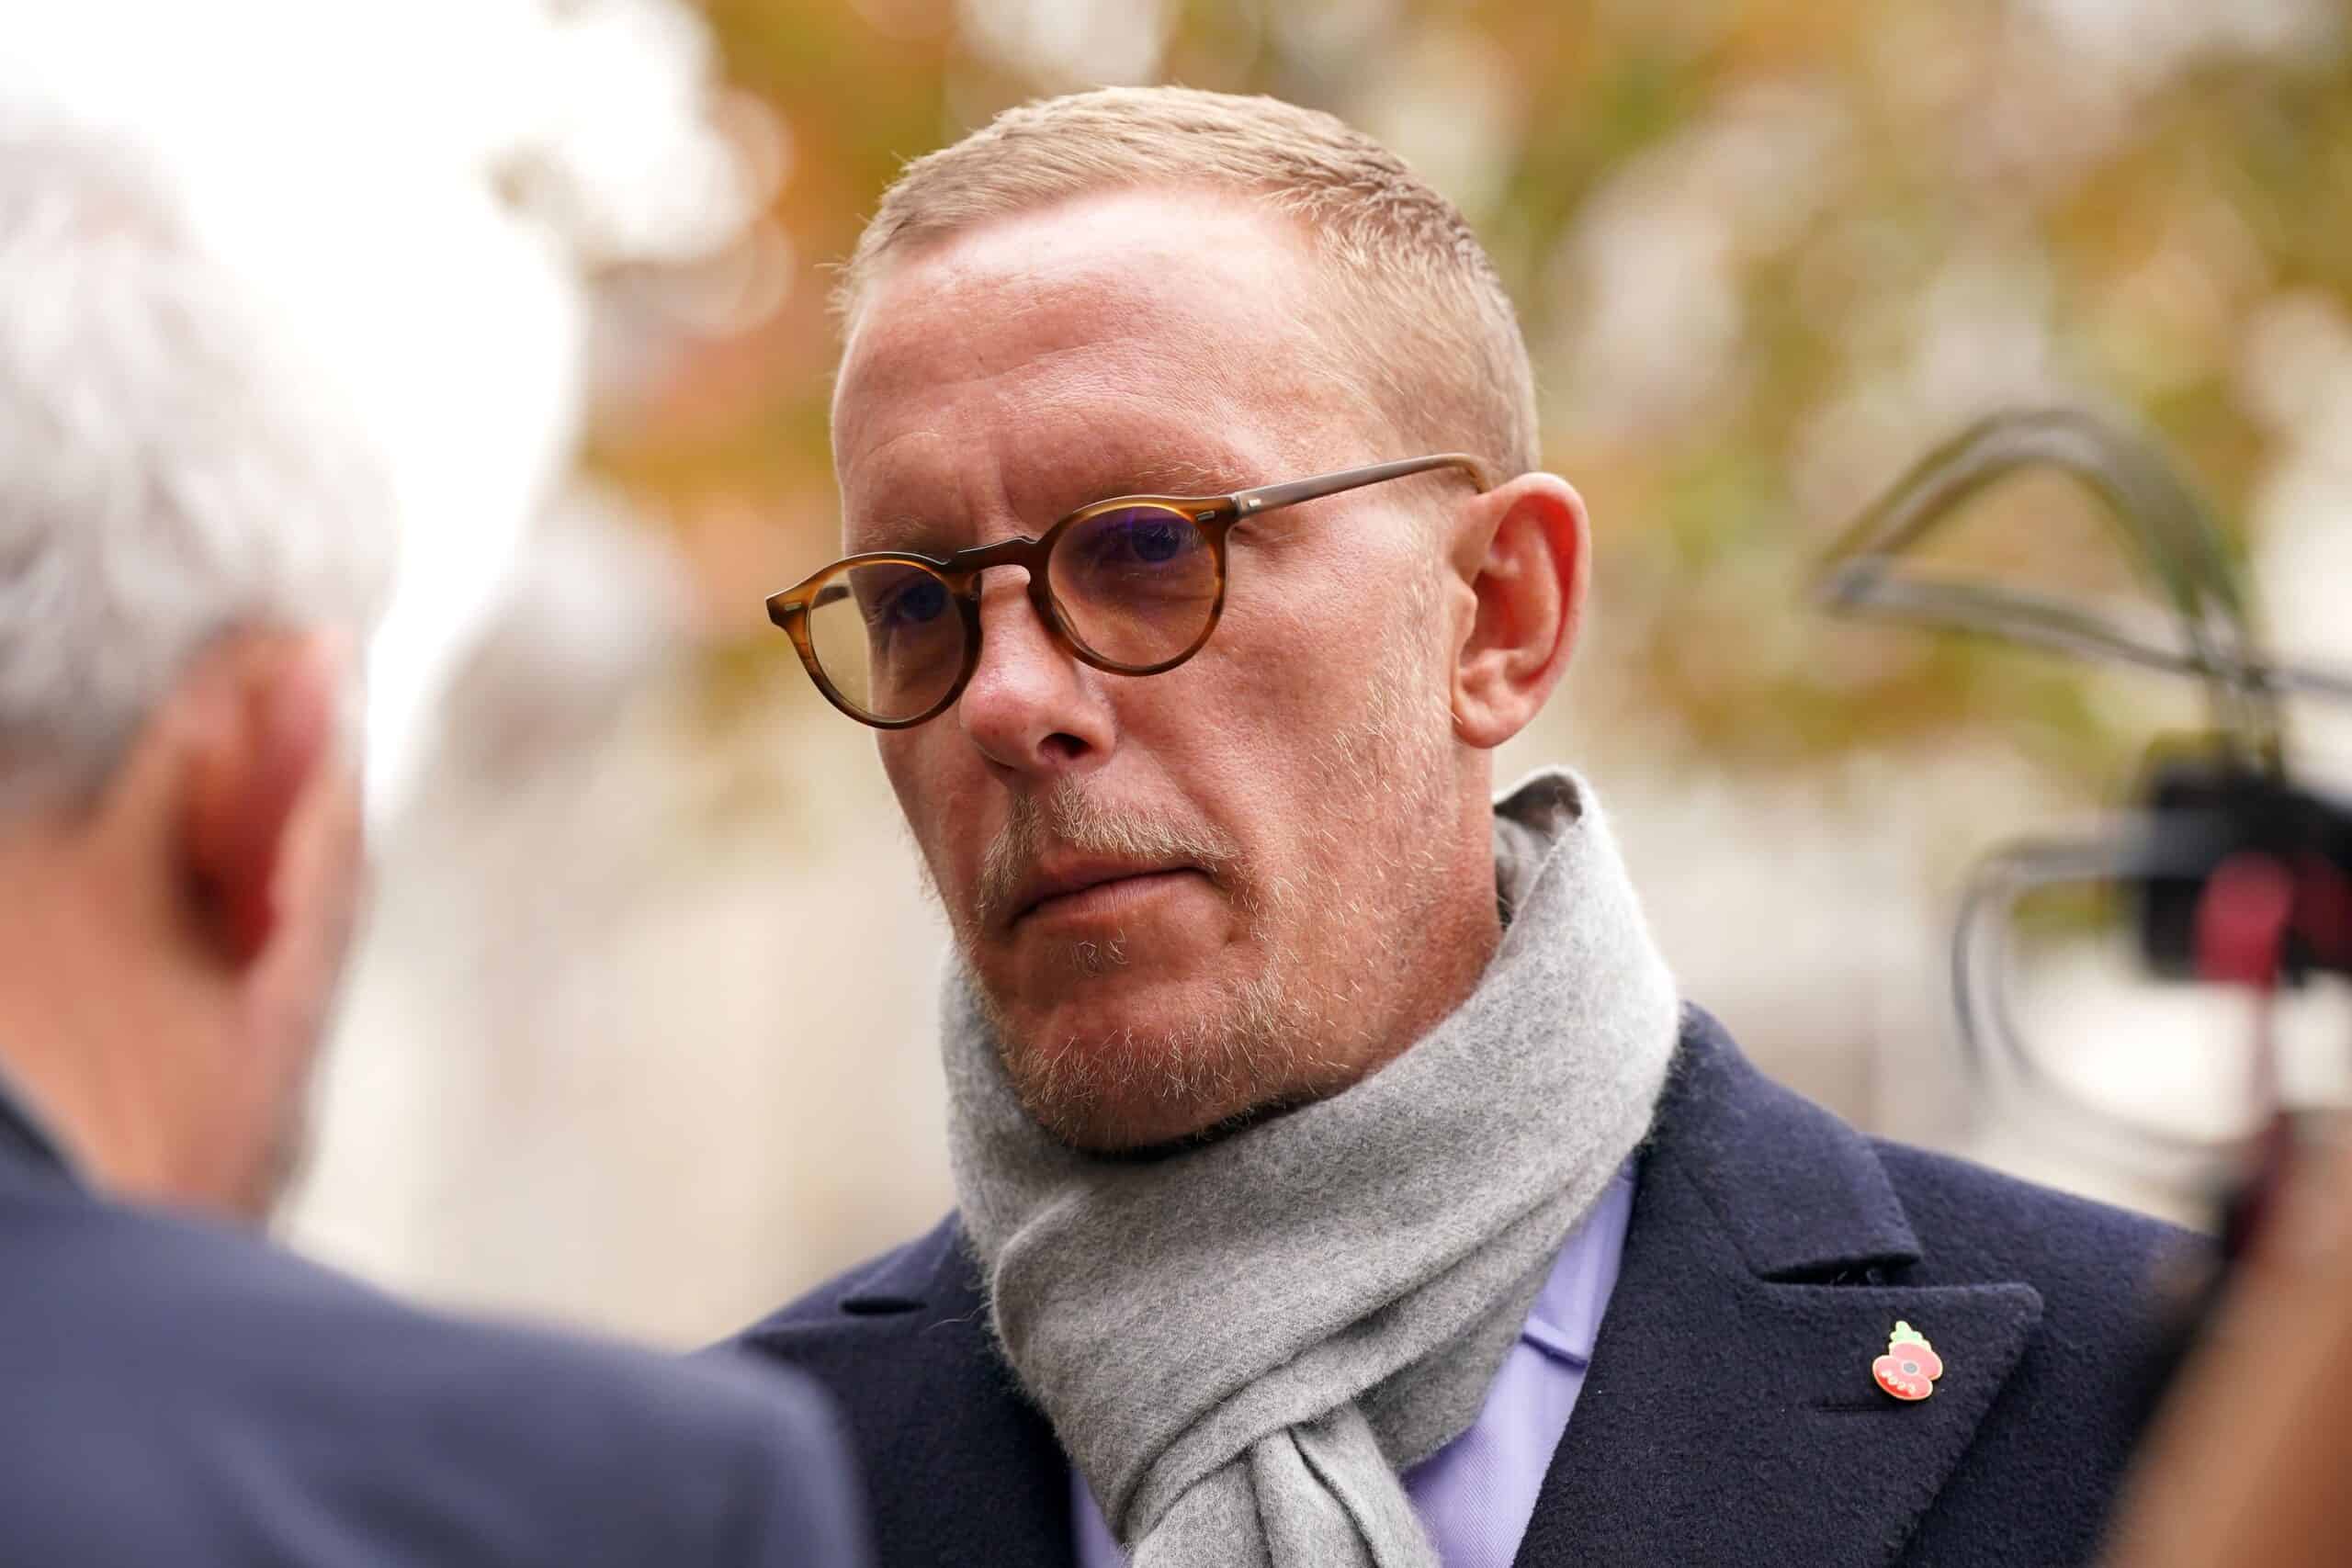 Laurence Fox LOSES High Court libel battle over social media row